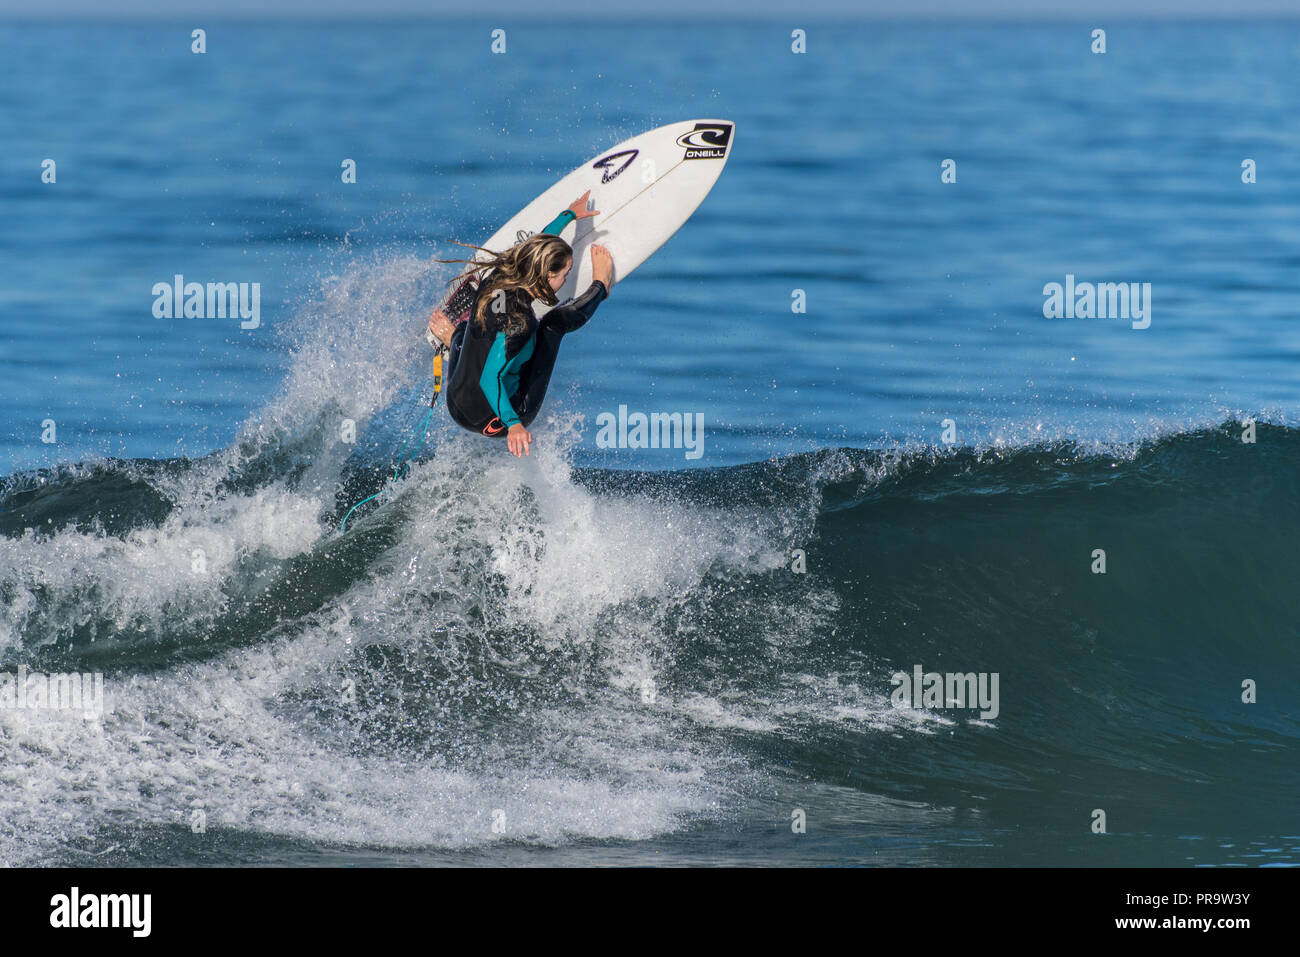 Telented female surfer launched an air on a clean wave pushed by Hurricane Rosa at Ventura's Surfers Knoll on September 30, 2018 in California. Stock Photo